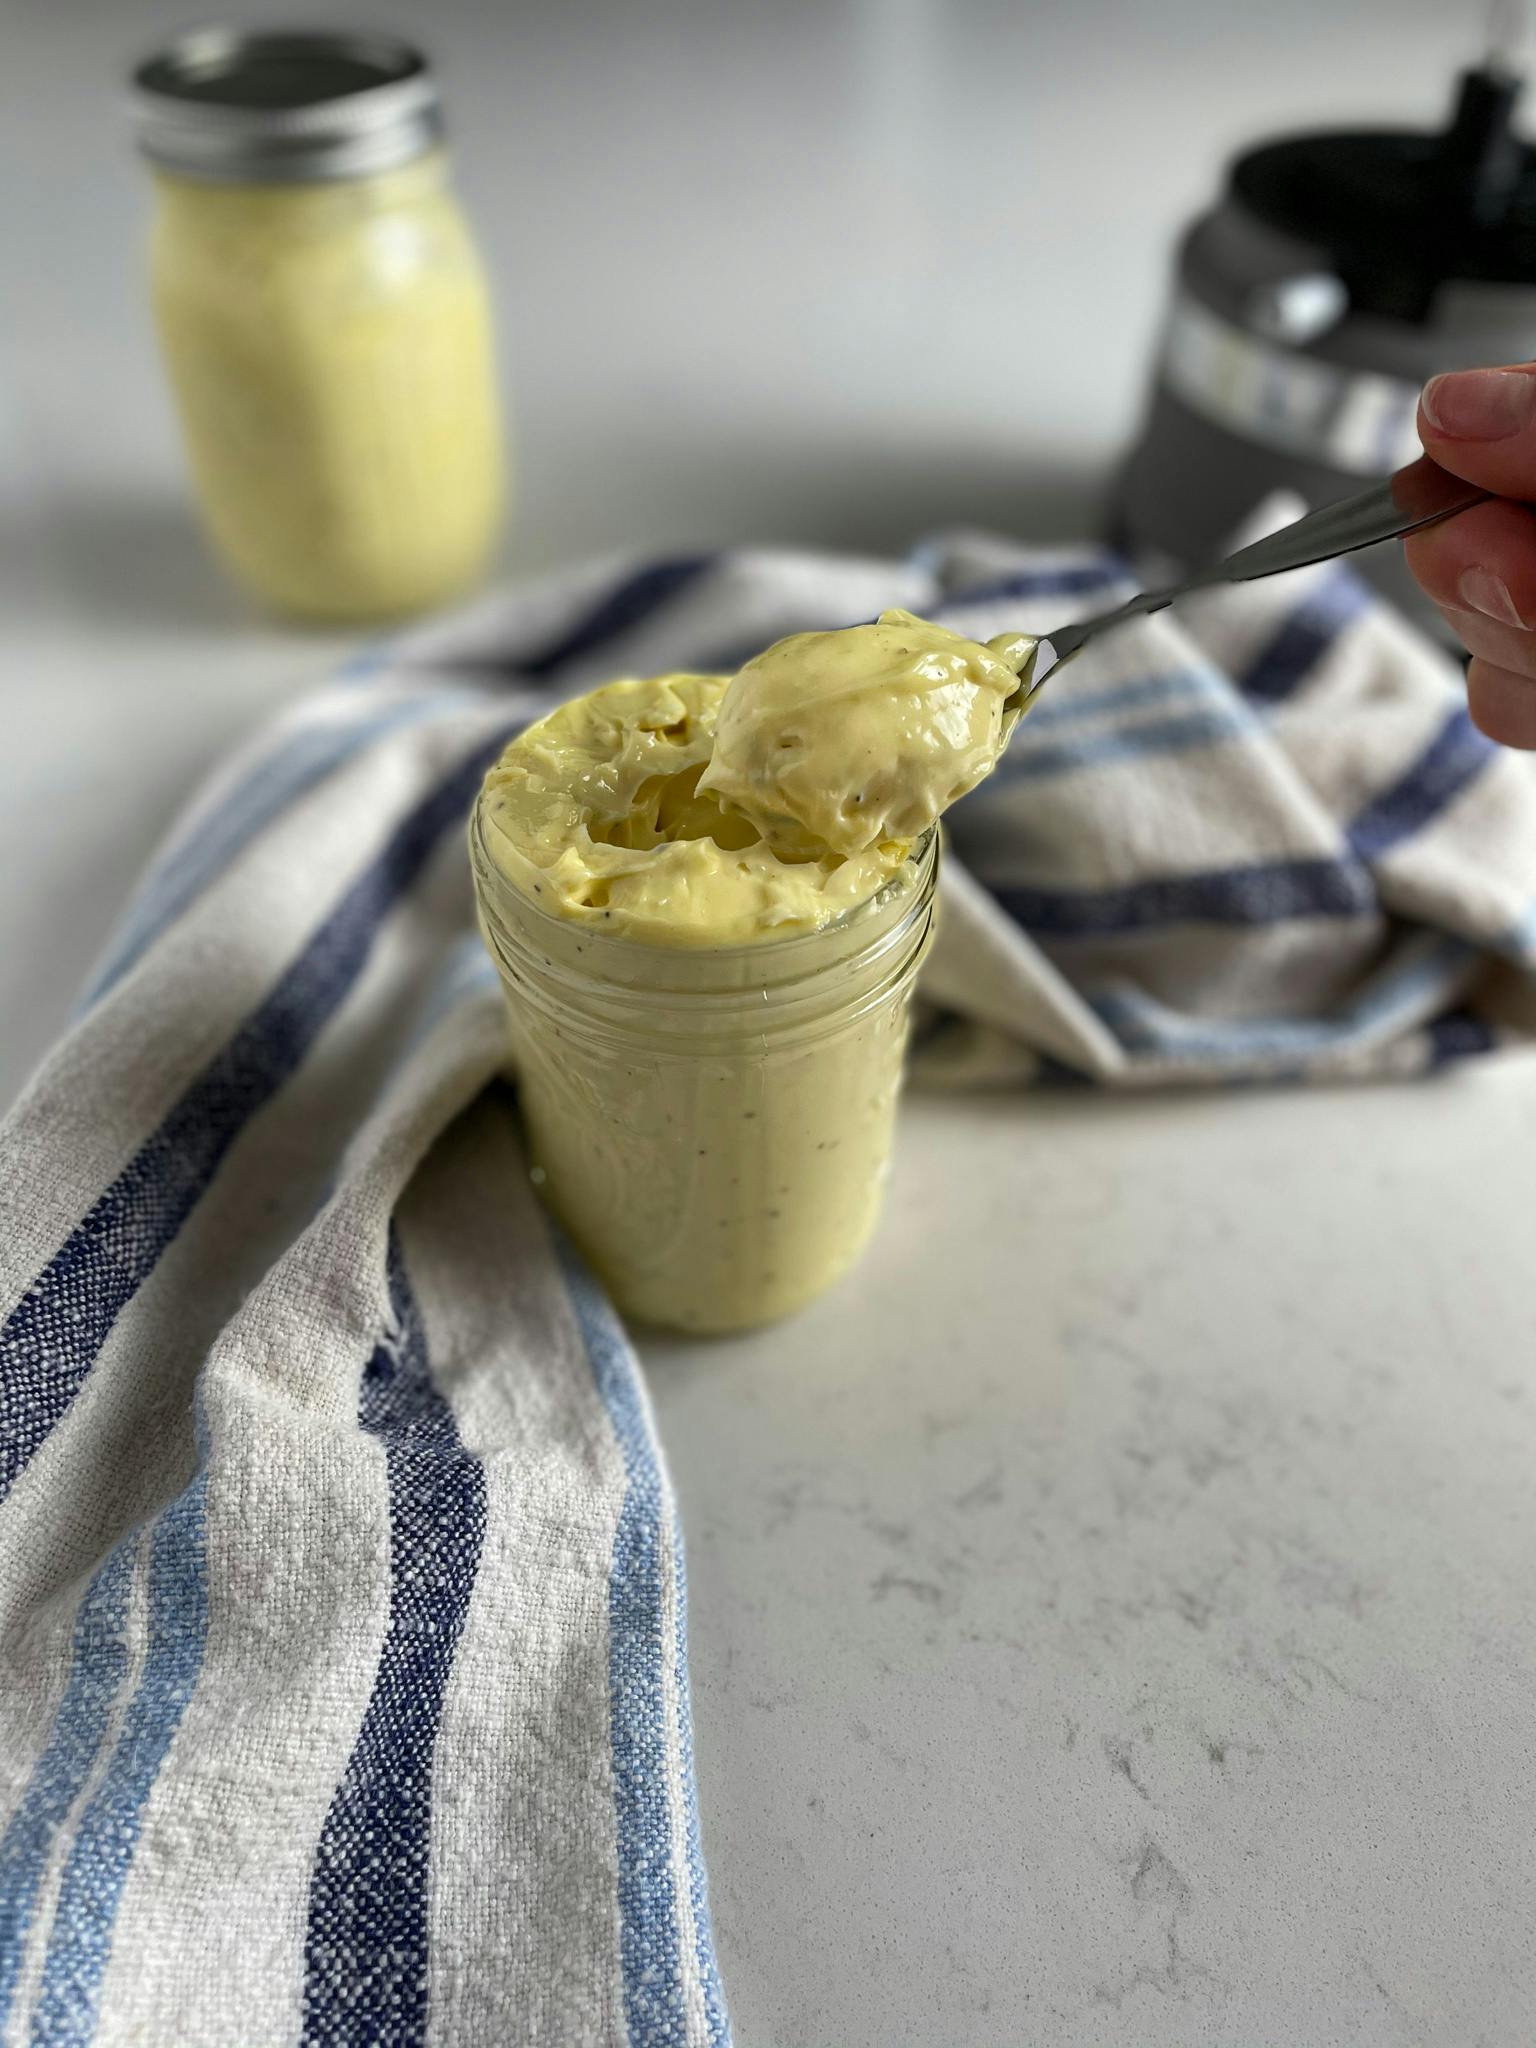 Avocado oil mayo in a glass jar being scooped out by spoon